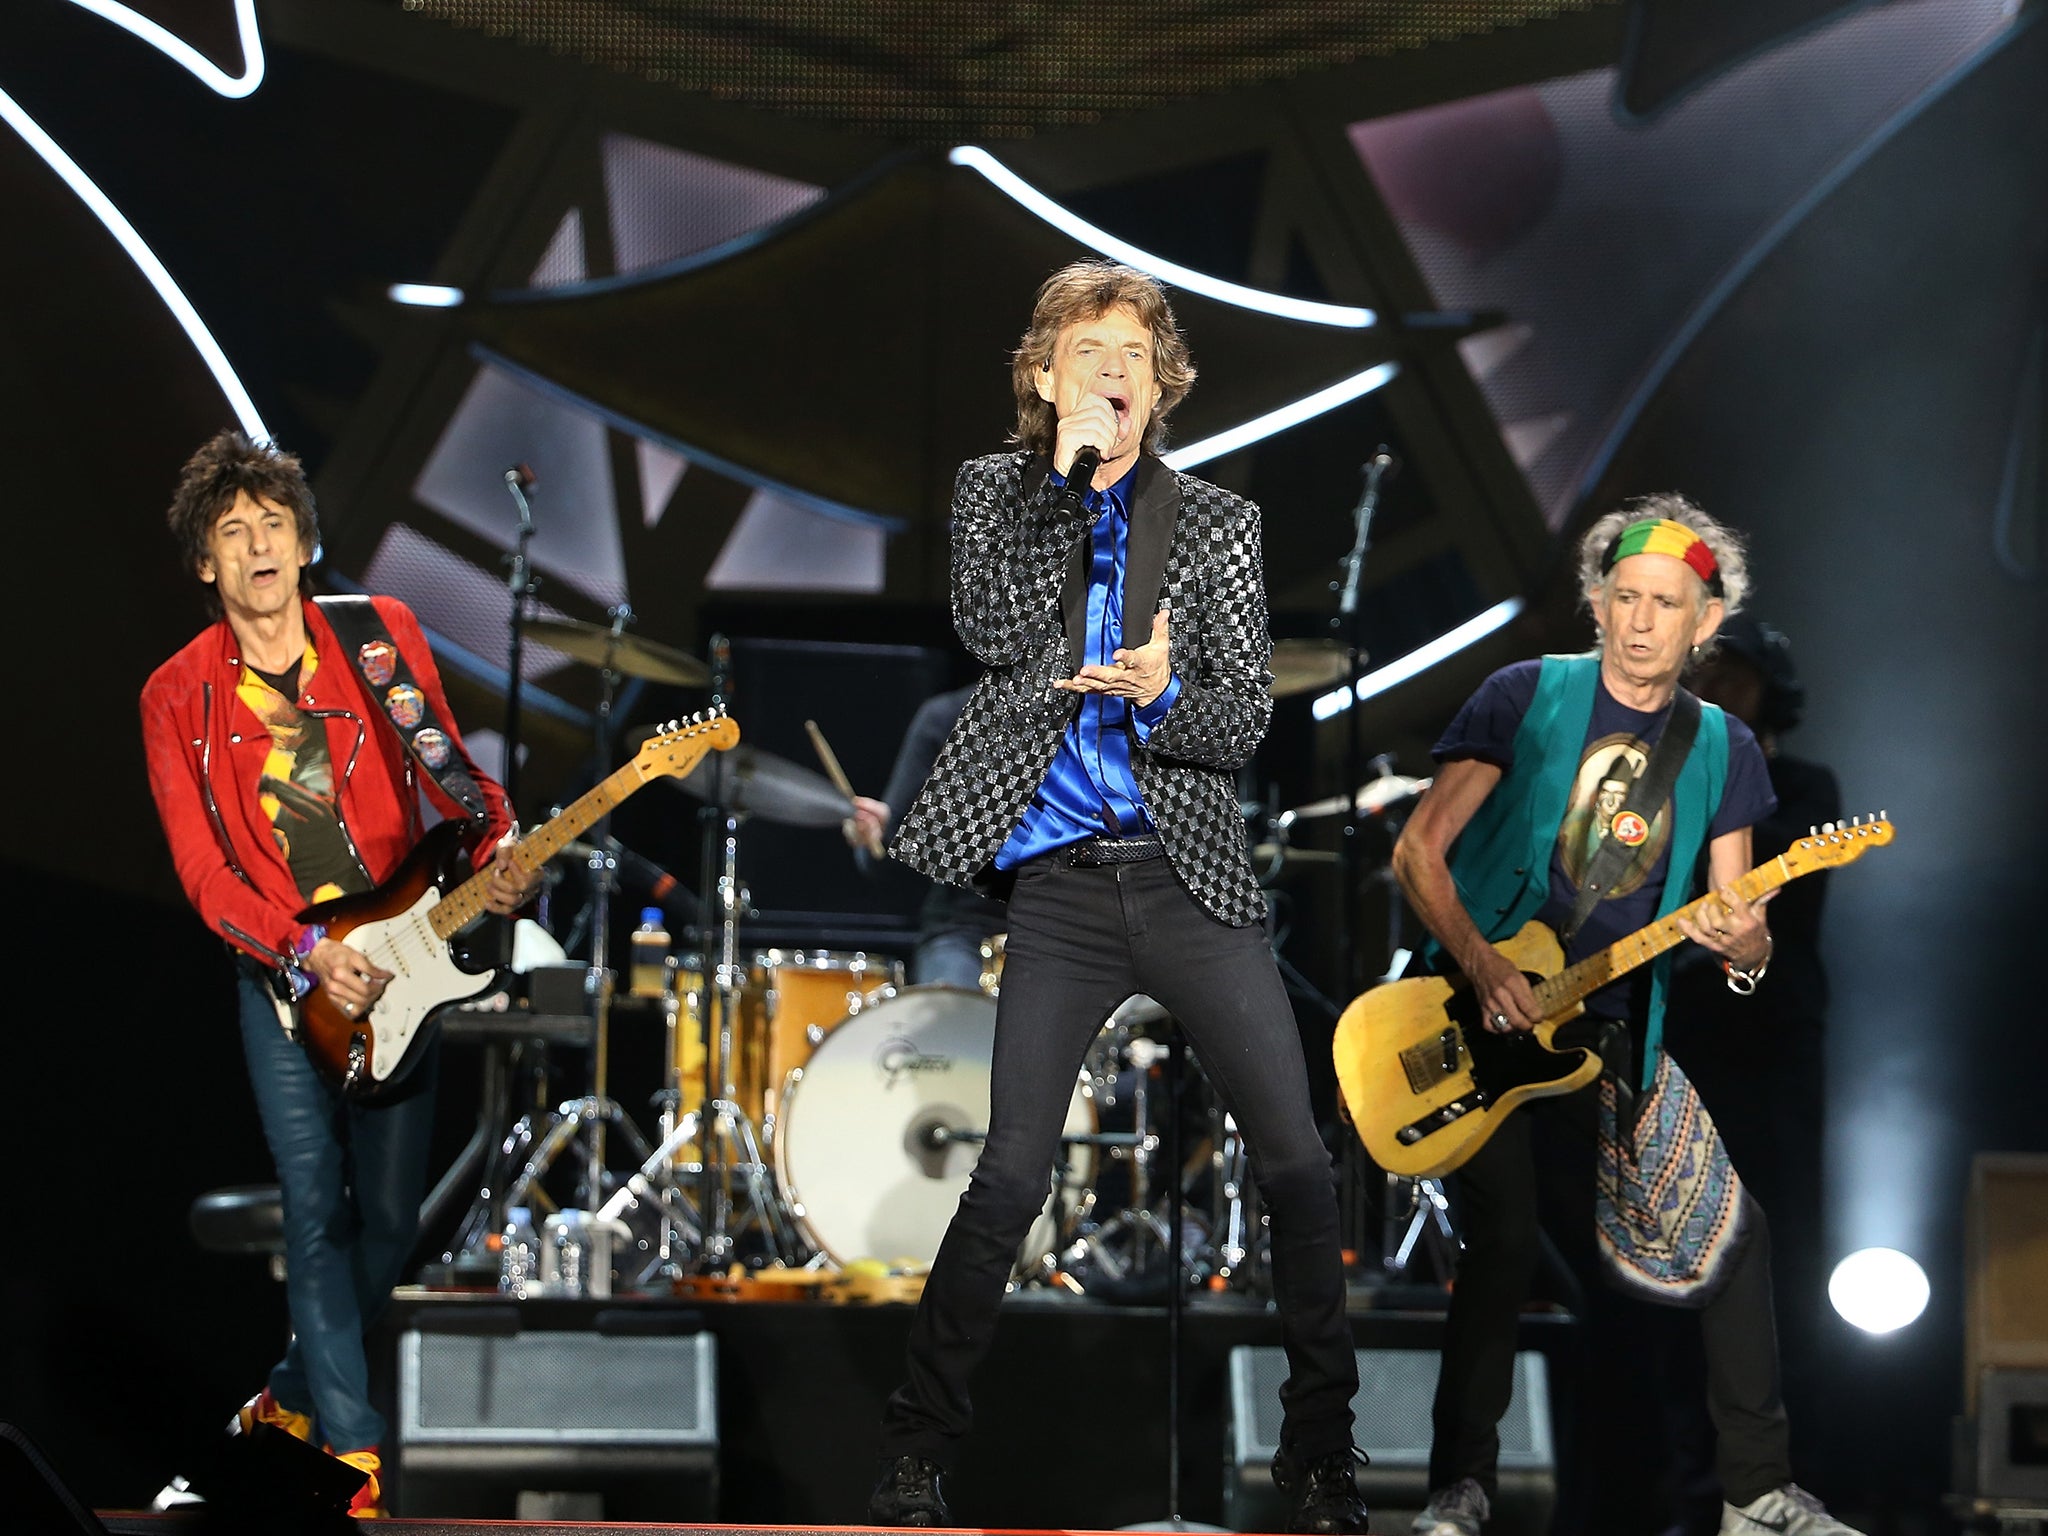 The Rolling Stones concert comes only days after President Barack Obama's recently announced visit to Cuba